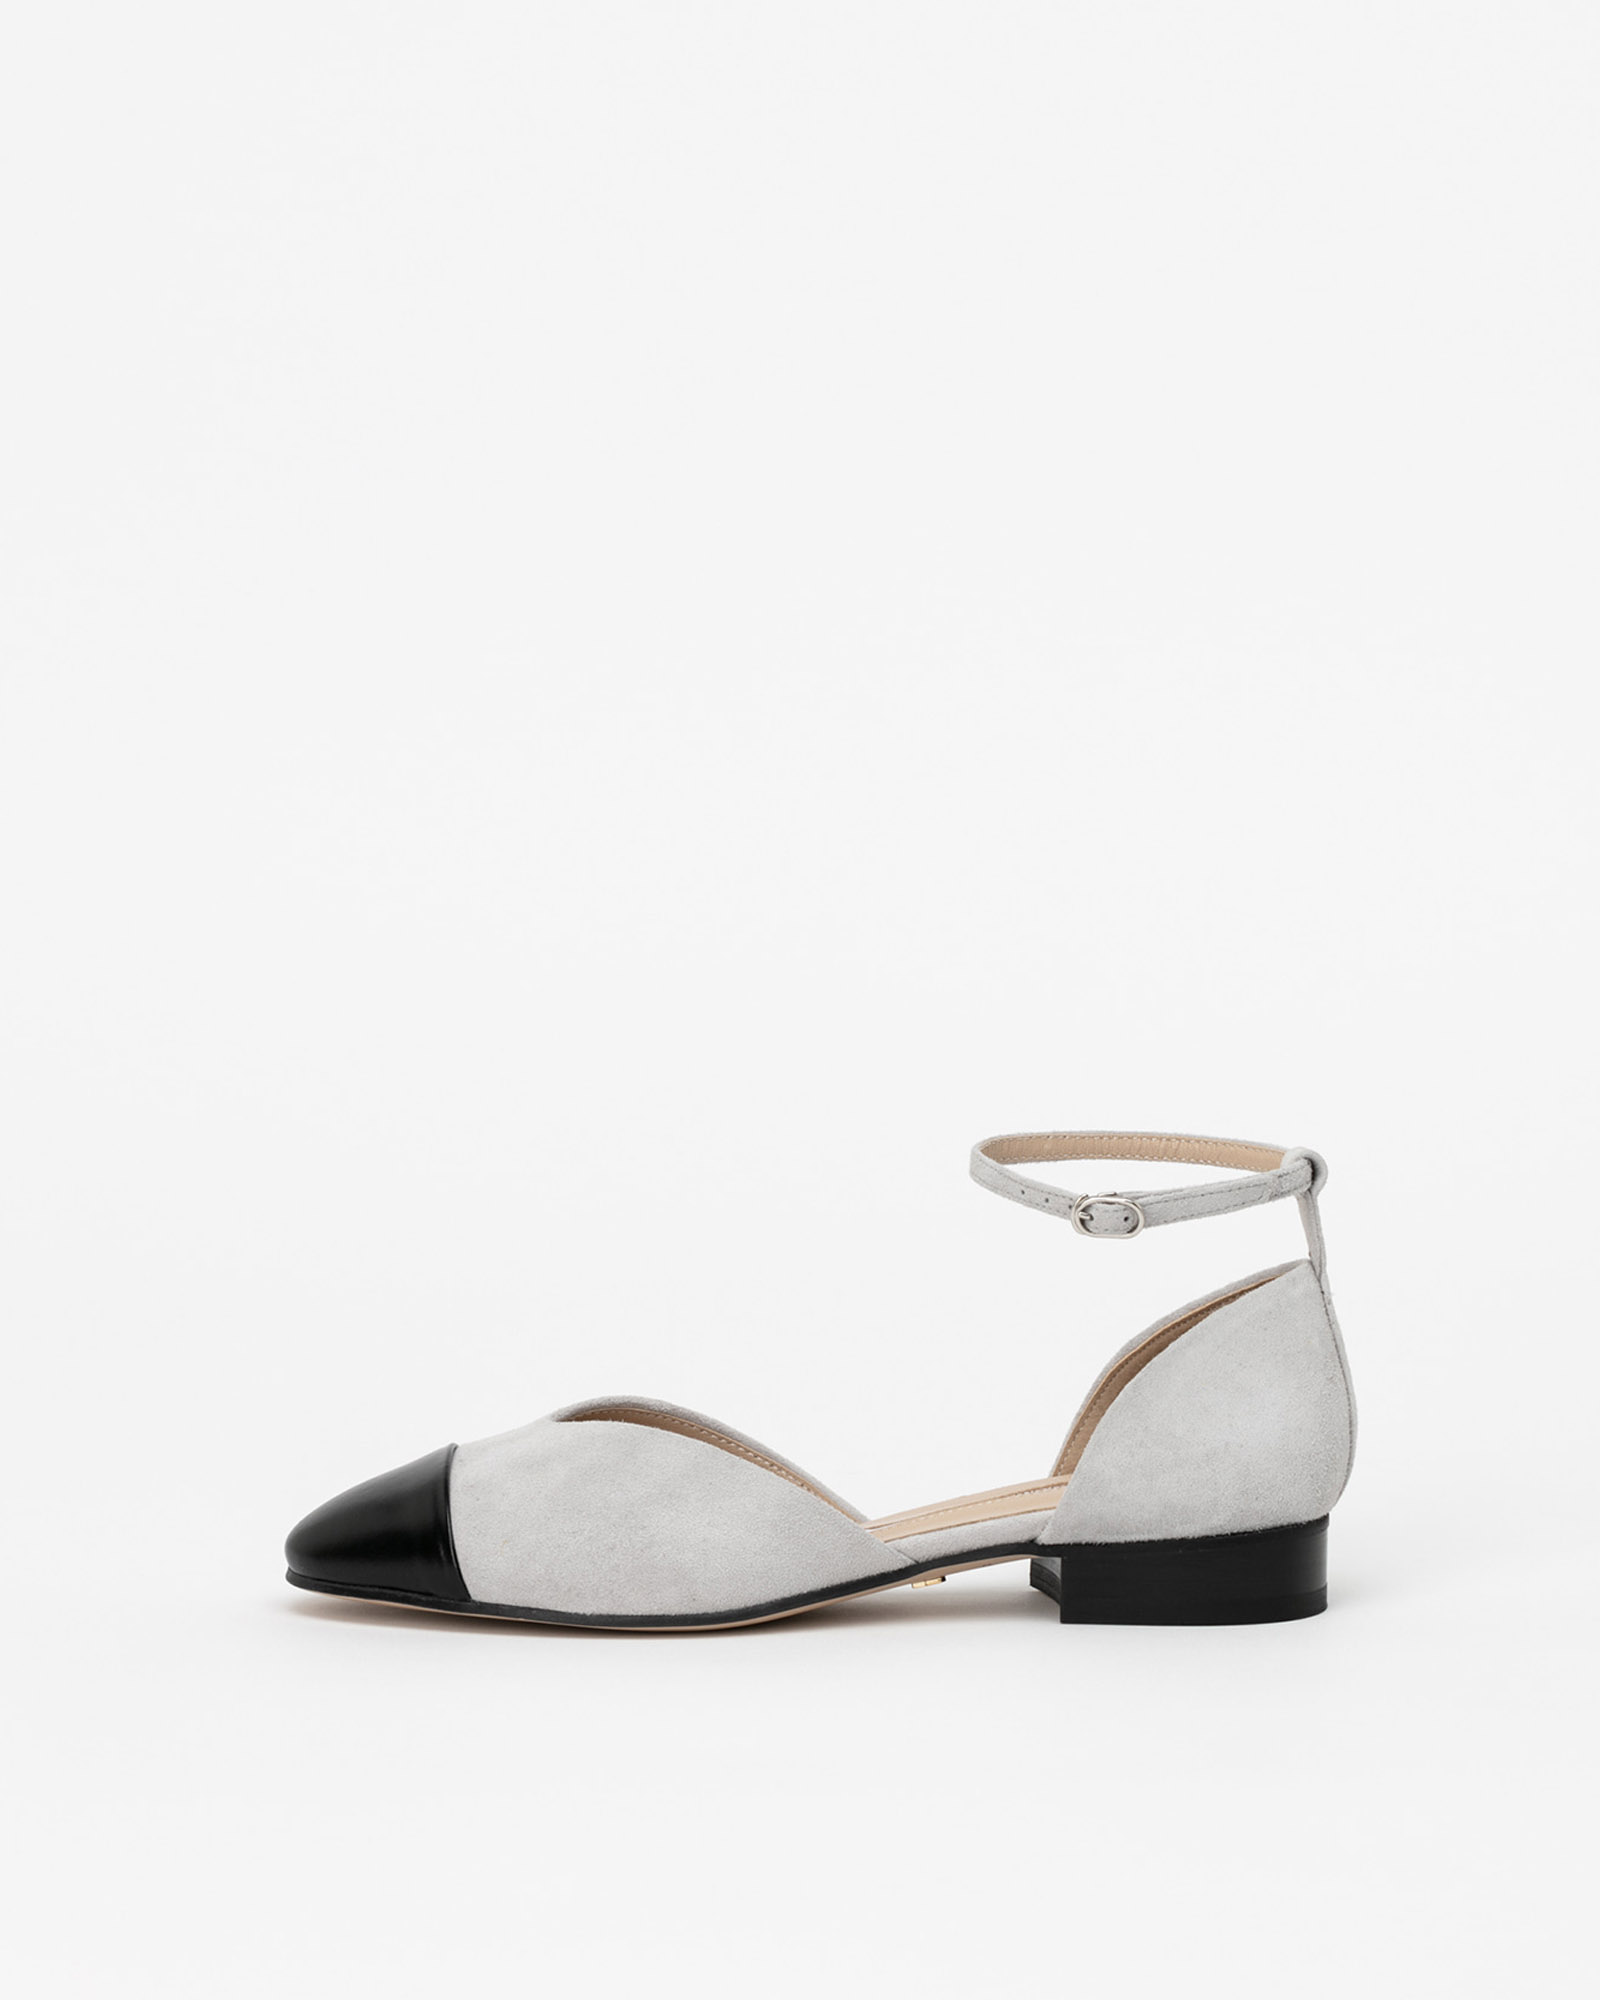 Porem Strap Flat Shoes in Gray and Black